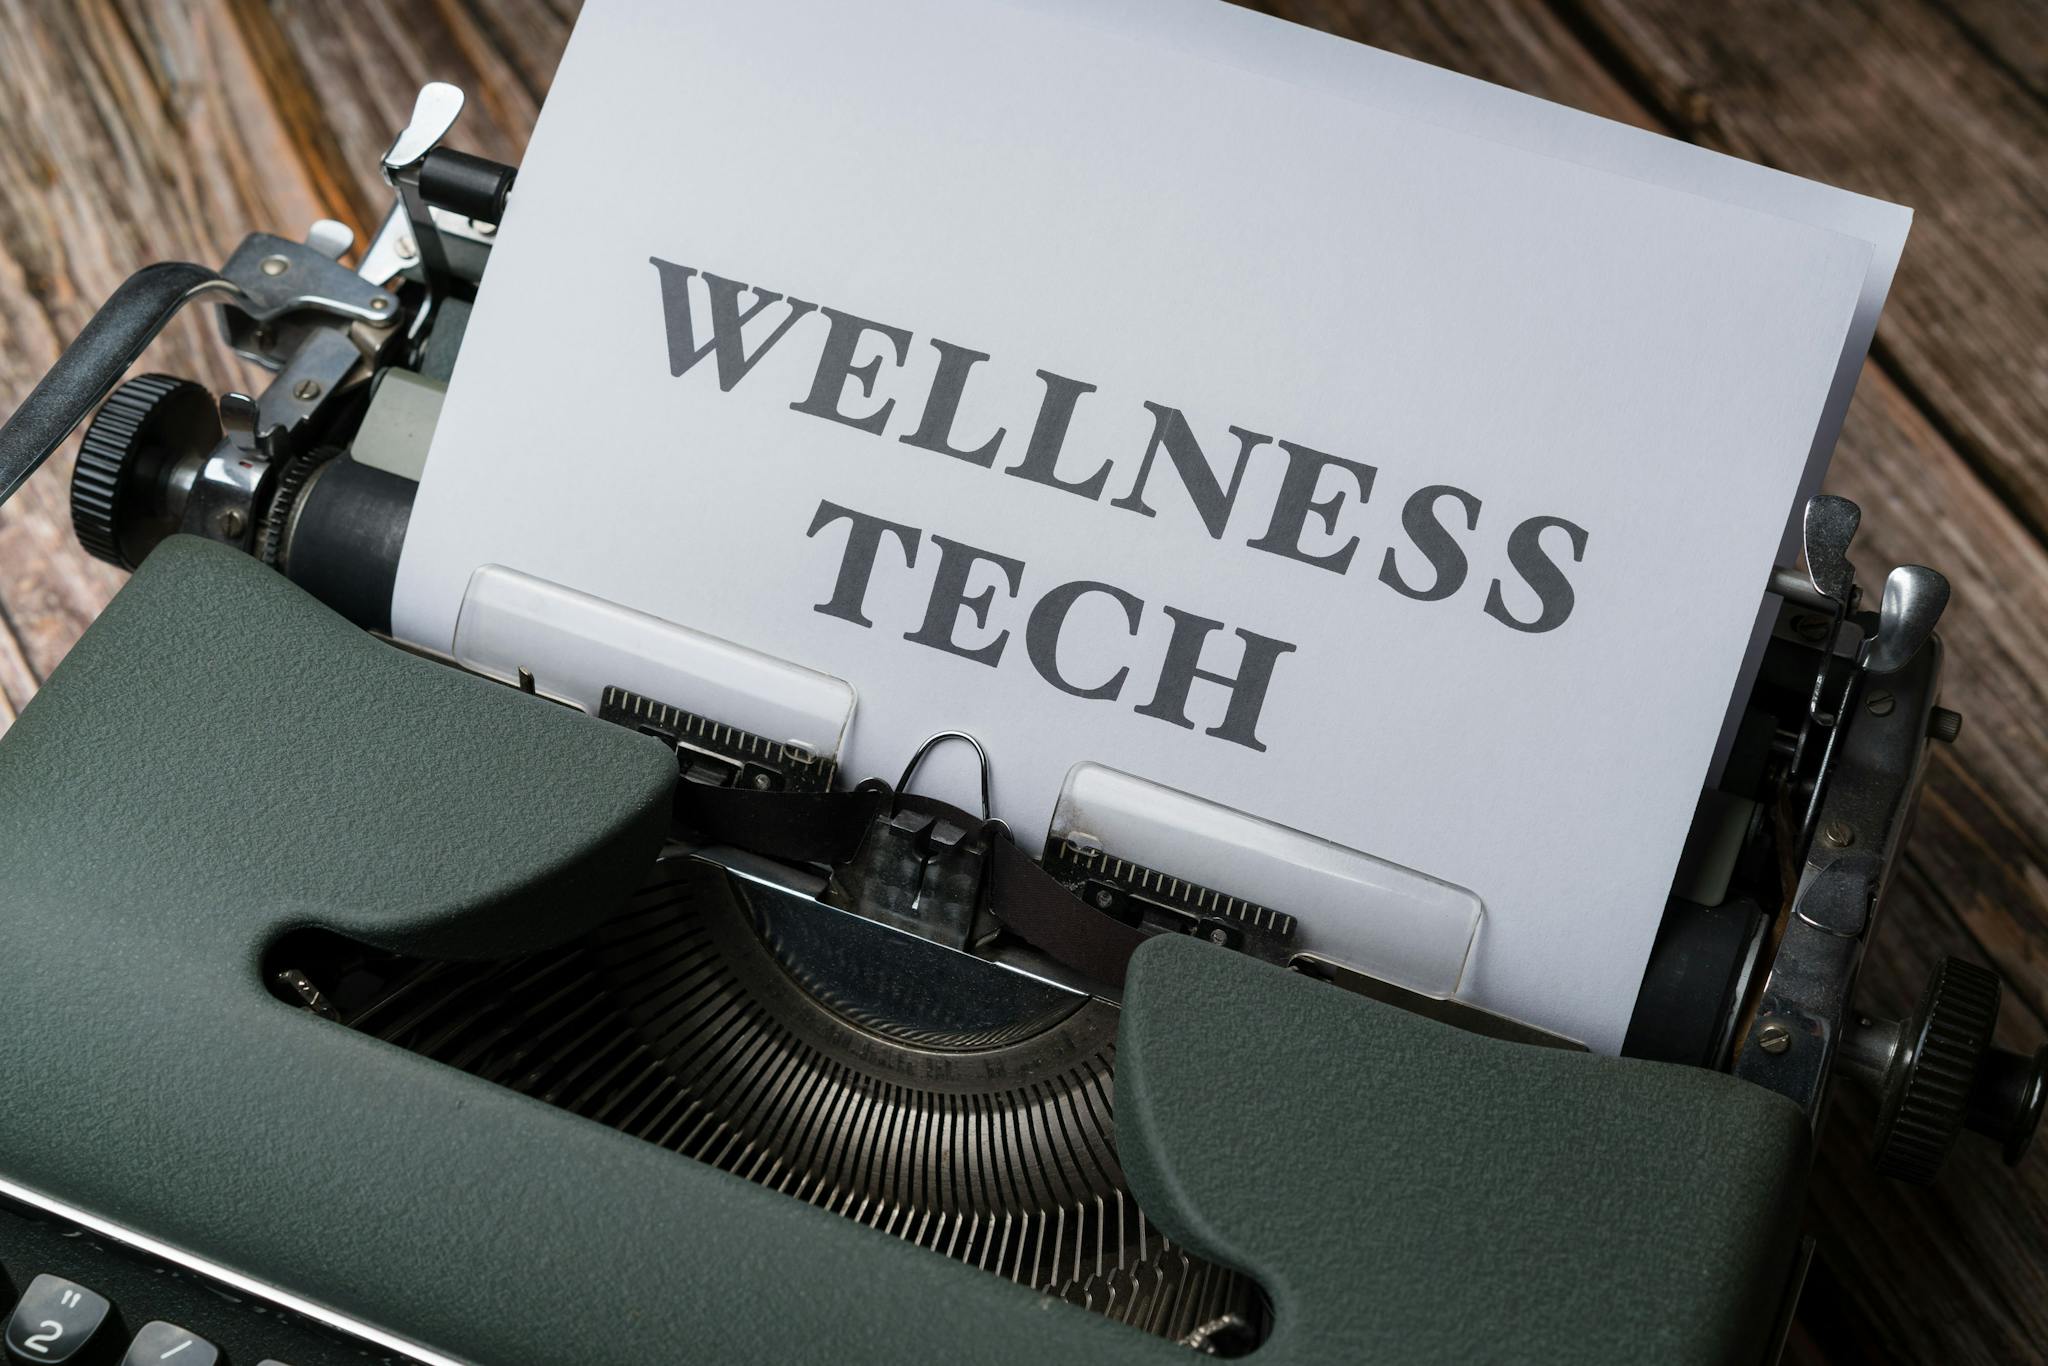 a typewriter with the word wellness tech